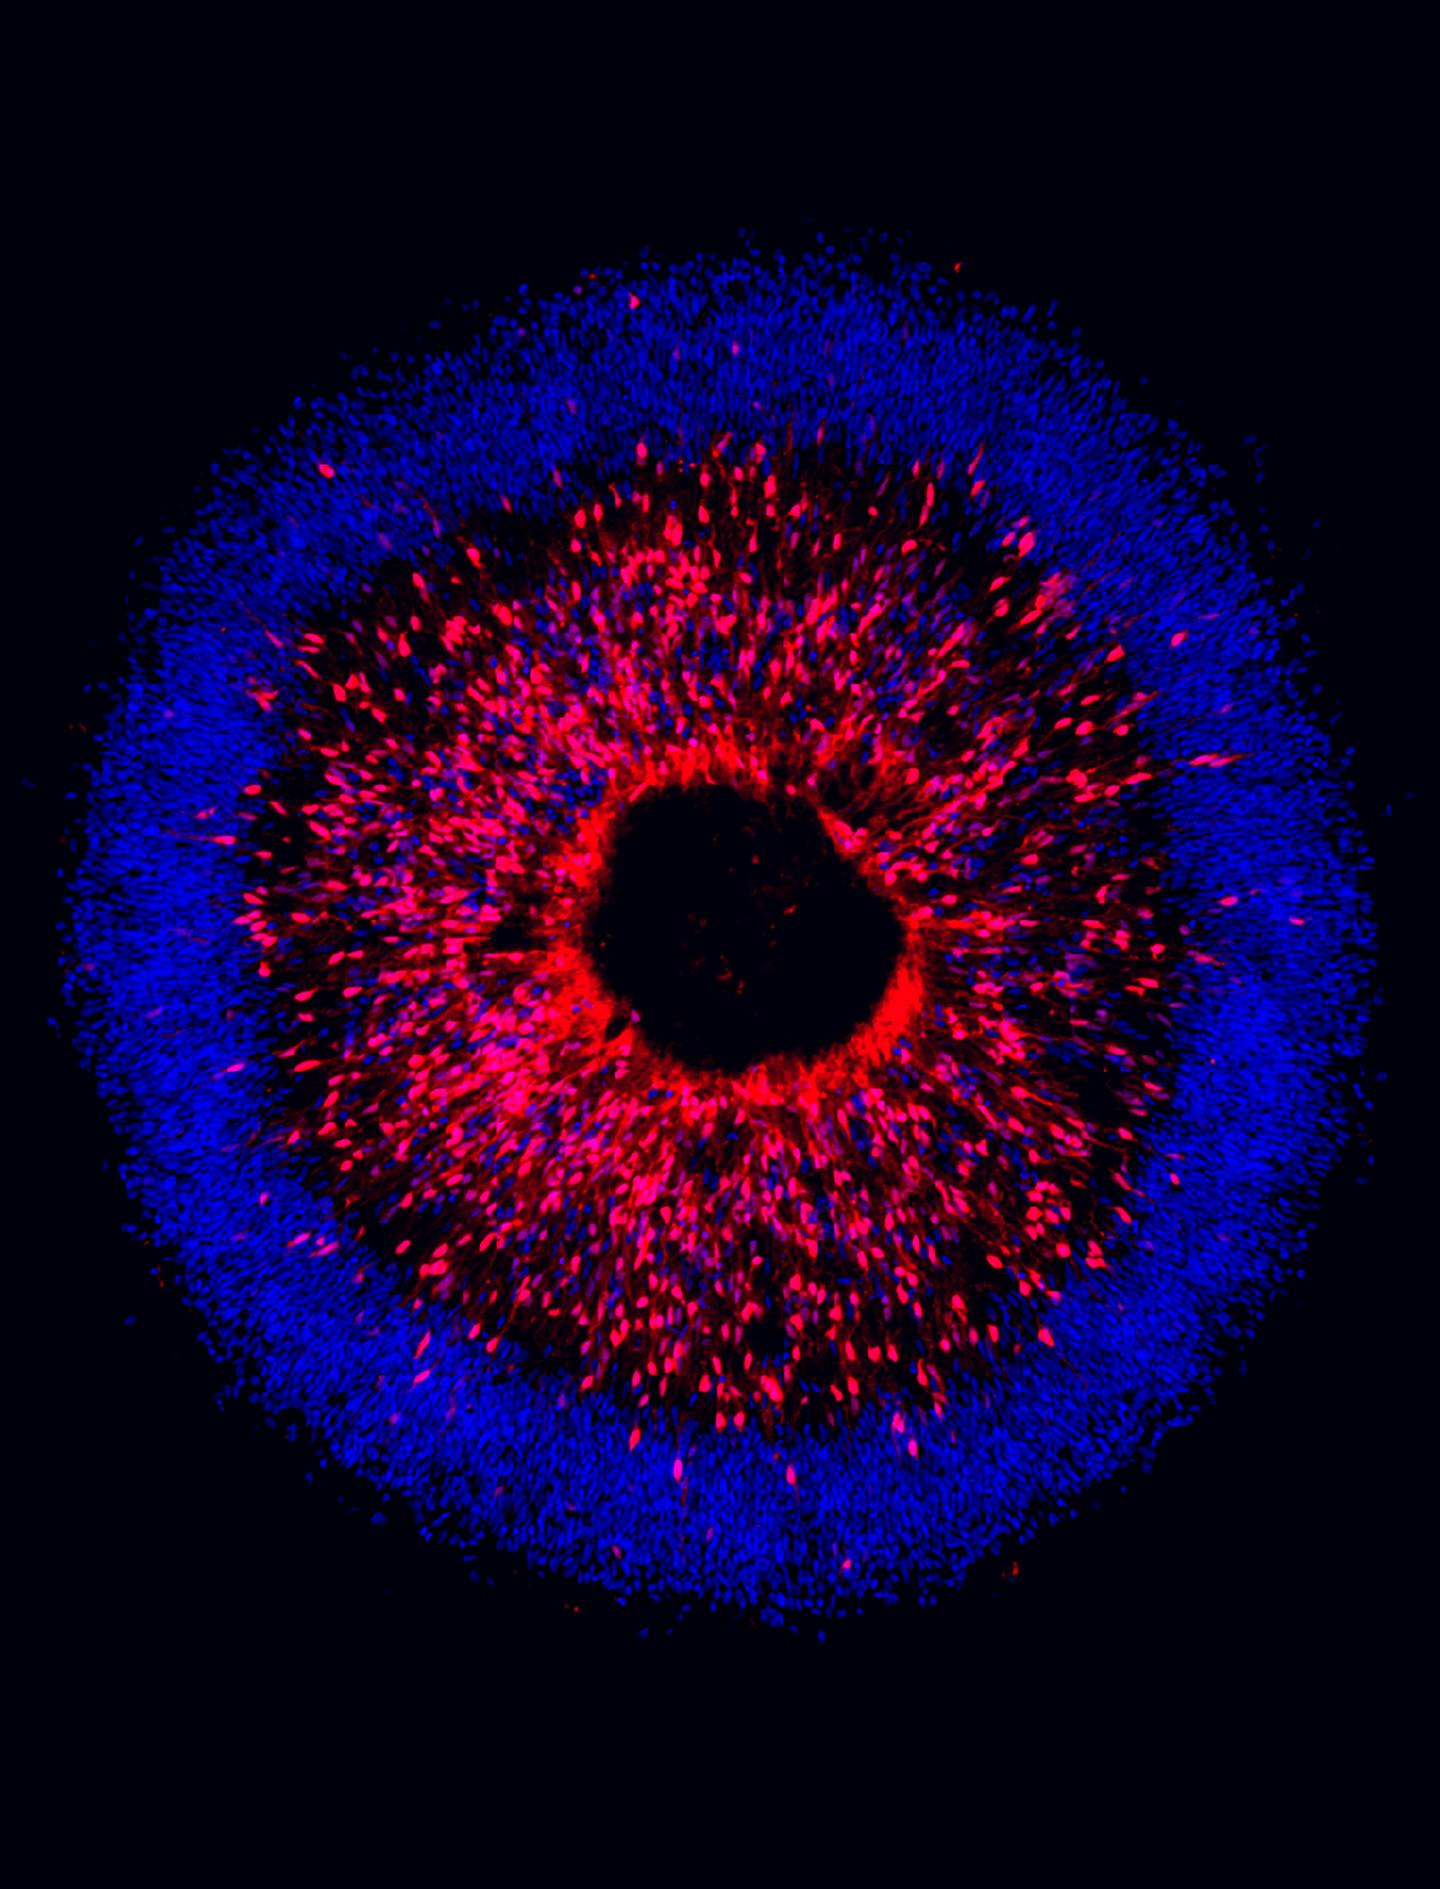 Human Stem Cells Modeled to Identify Degeneration in Glaucoma